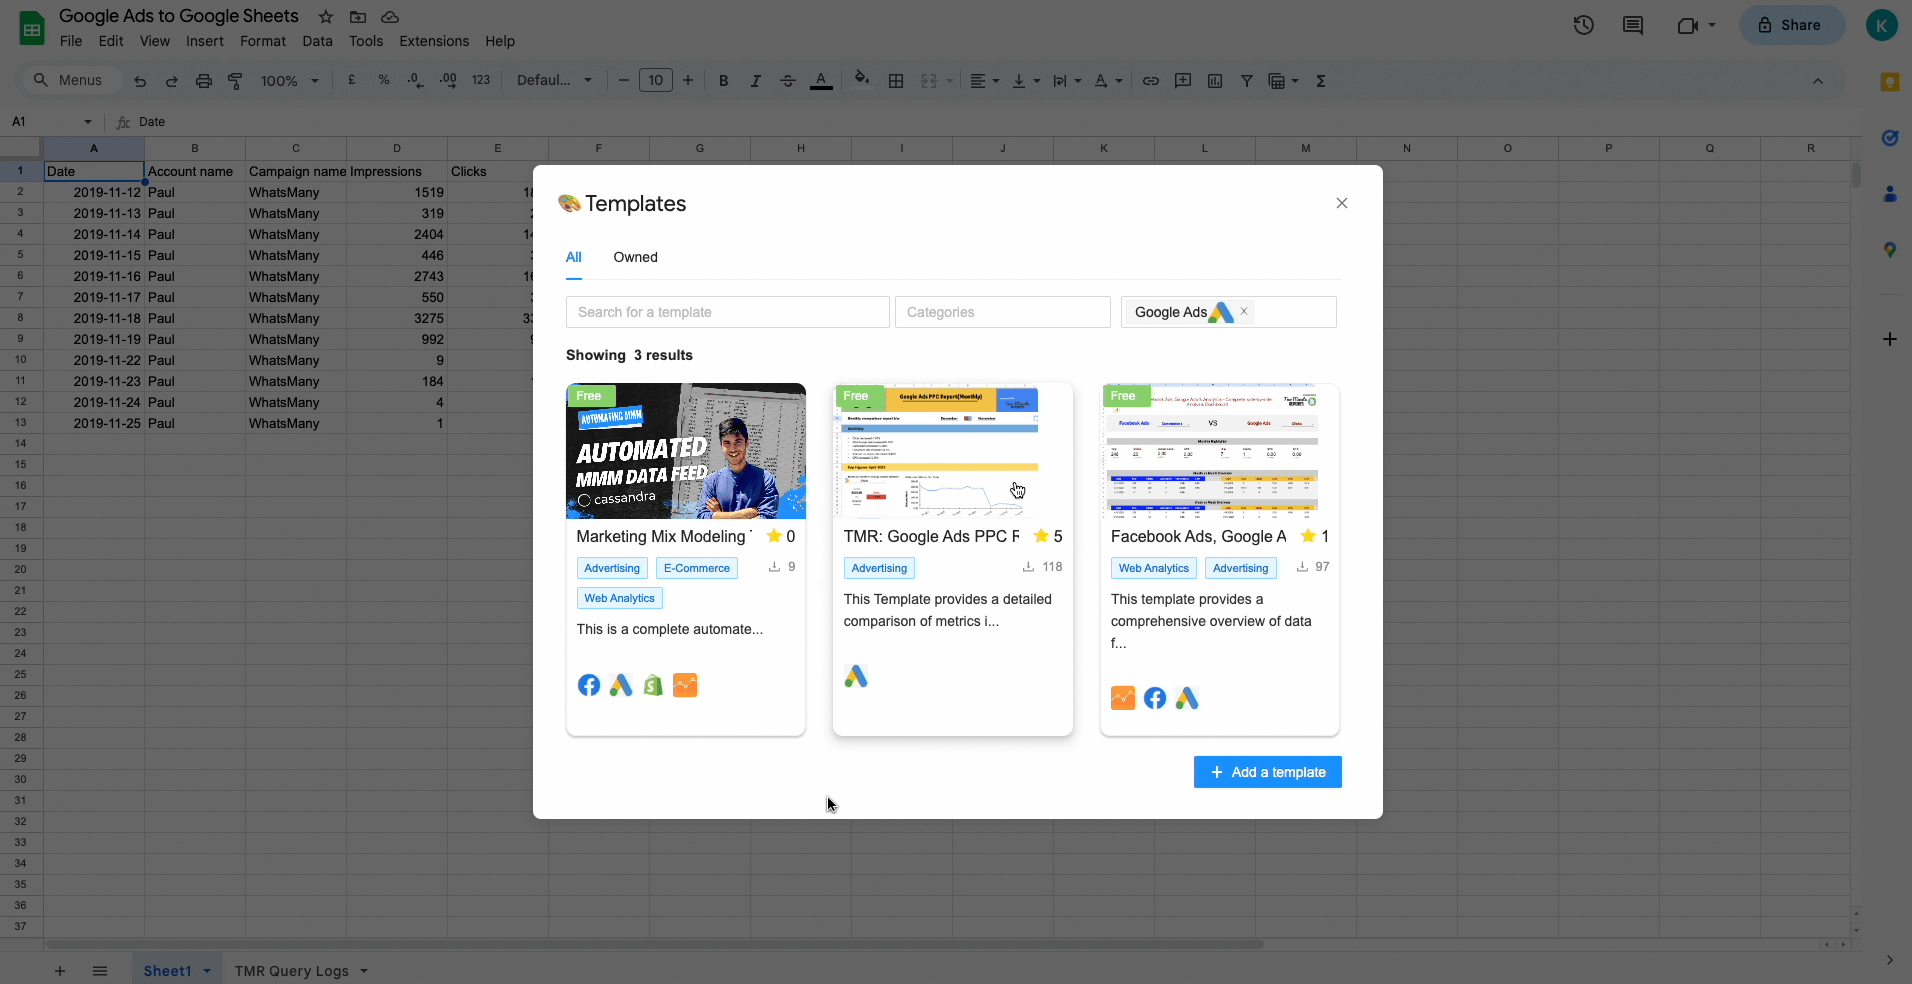 Google ads to google sheets use